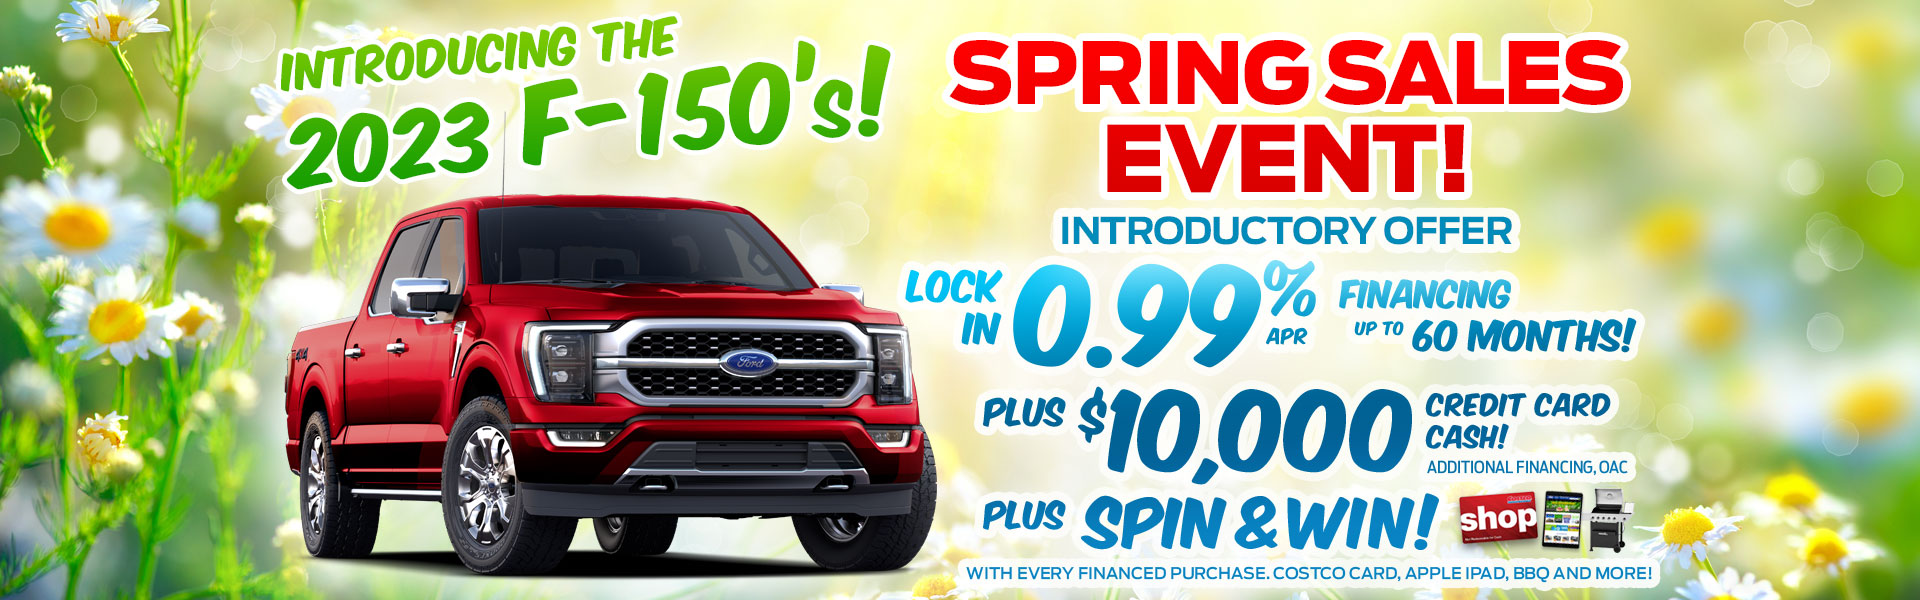 2023 Ford F-150 Spring Sales Event